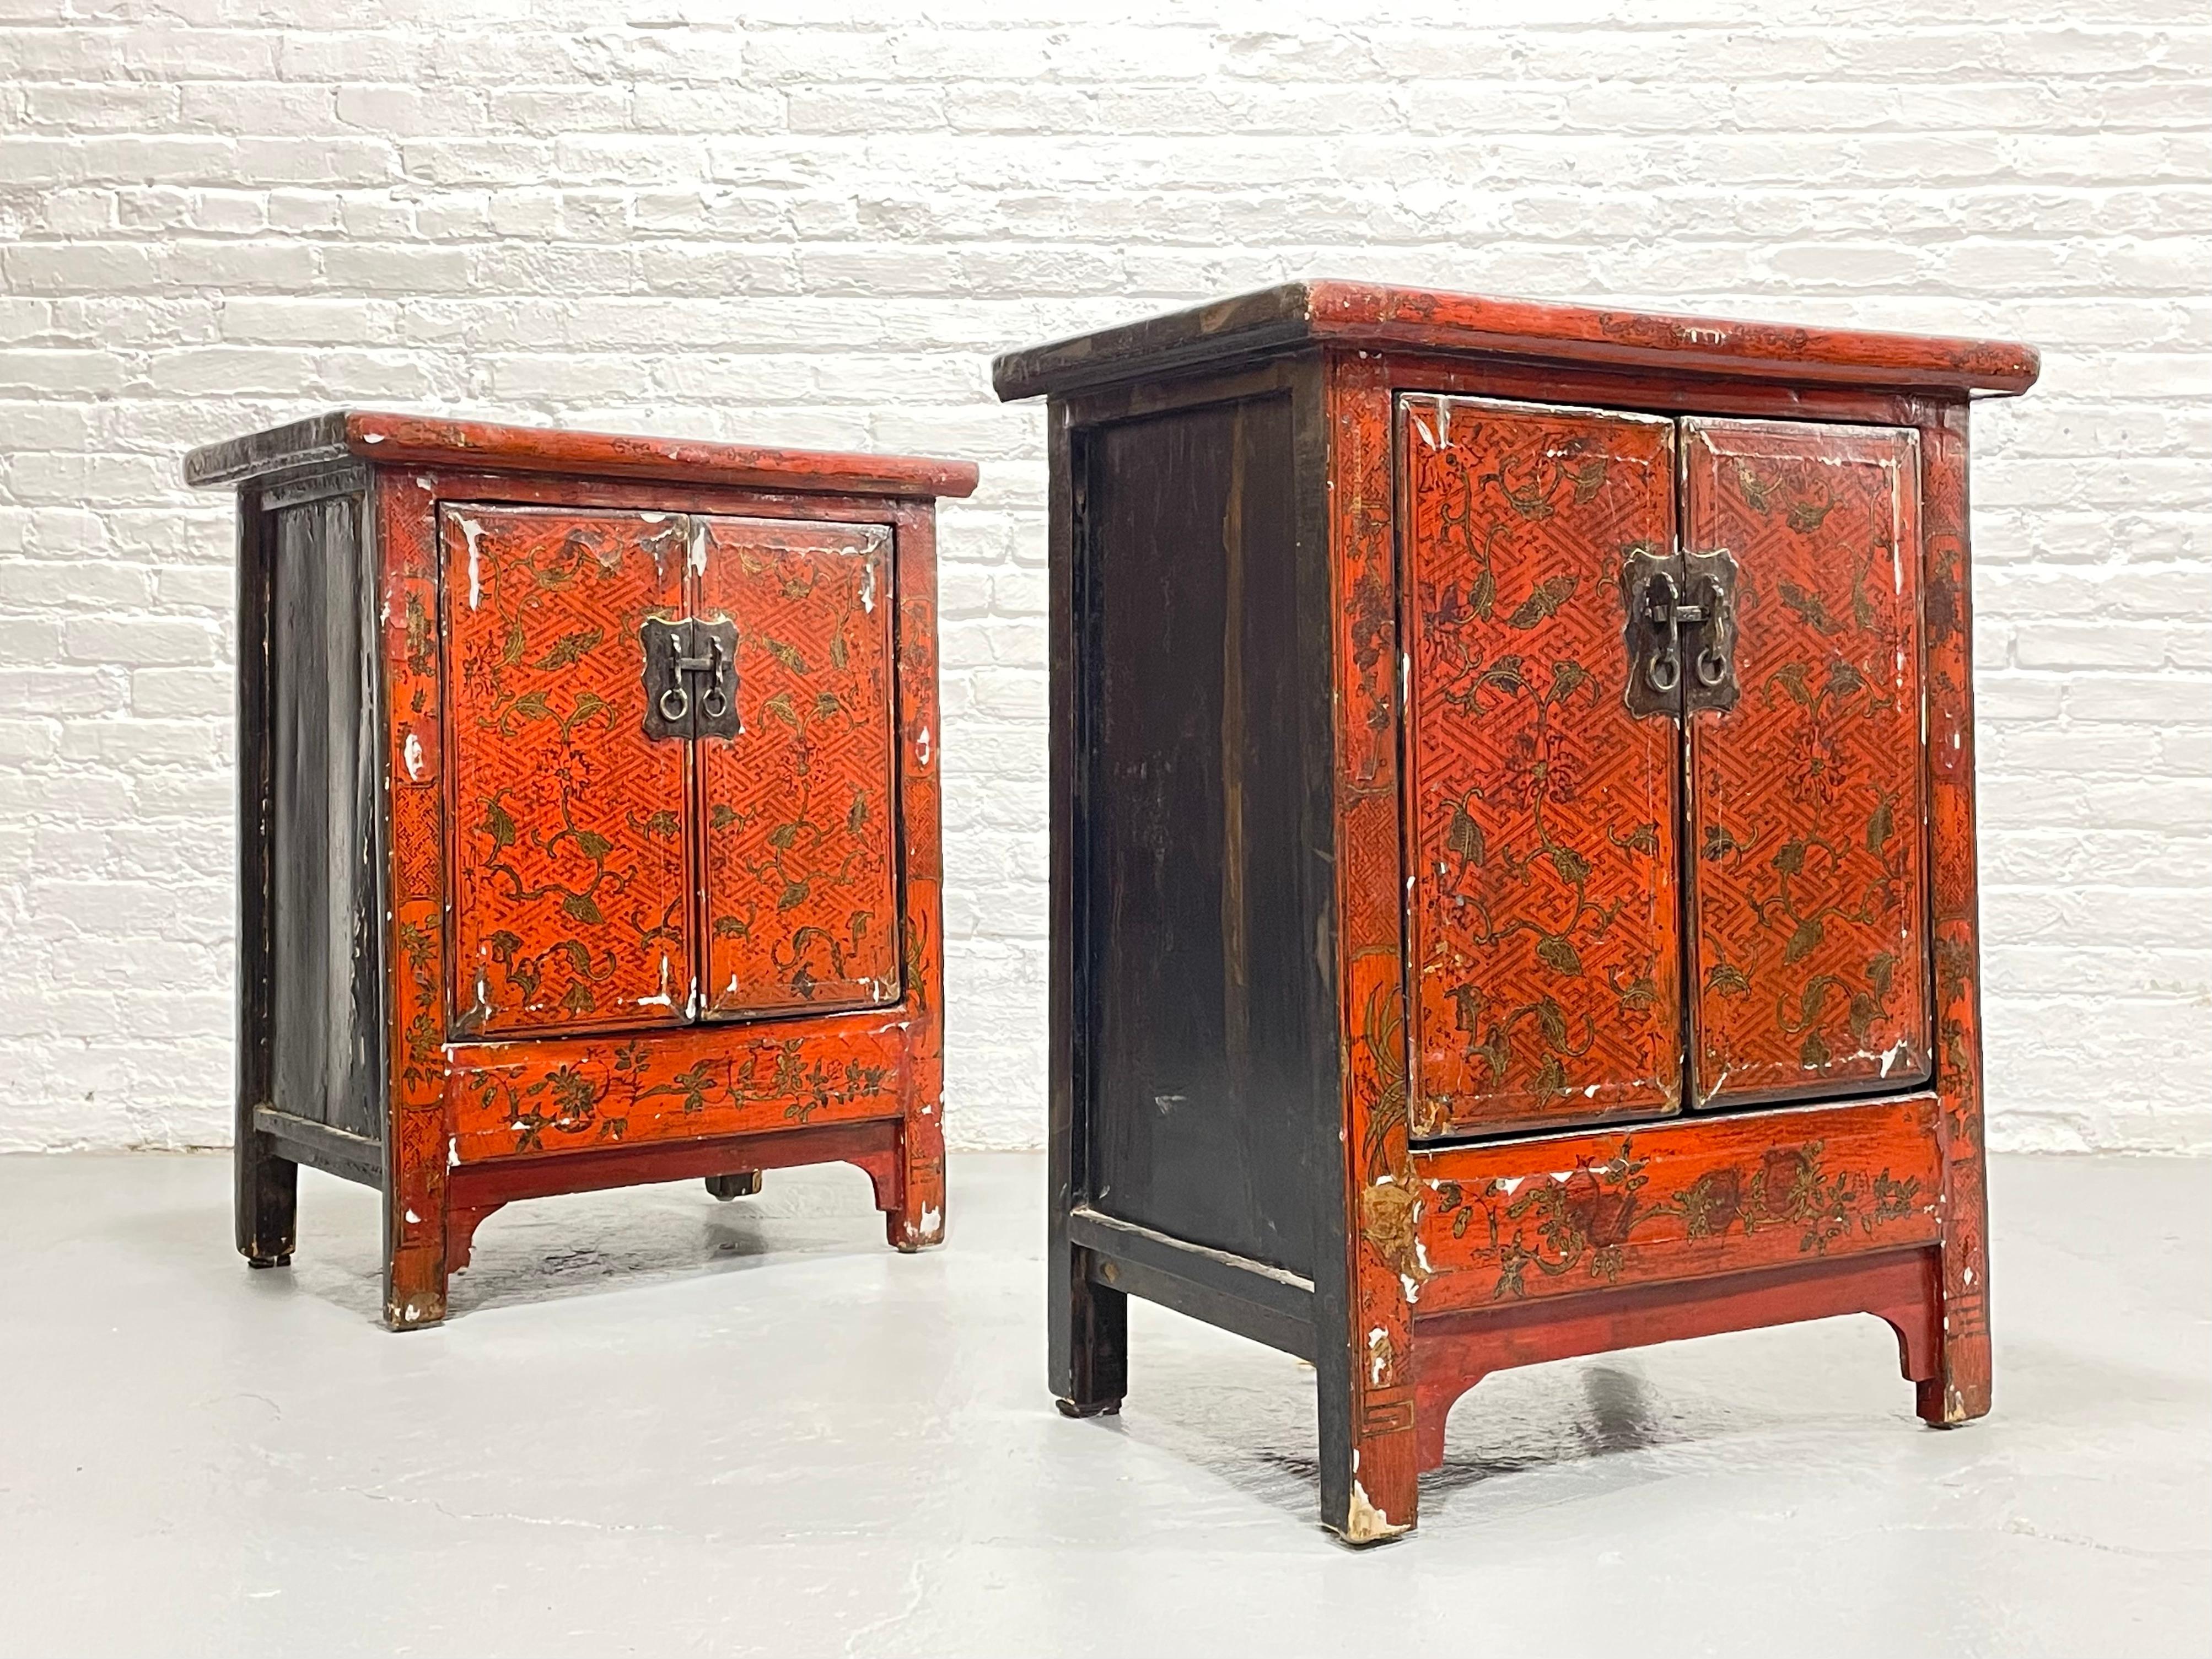 Pair of matching Chinese “Marriage Cabinets” constructed of wood with original brilliant red lacquer with hand painted designs. Each chest has two doors that lock with a brass lock pin and a shelving area inside with a single drawer. Cabinets are in